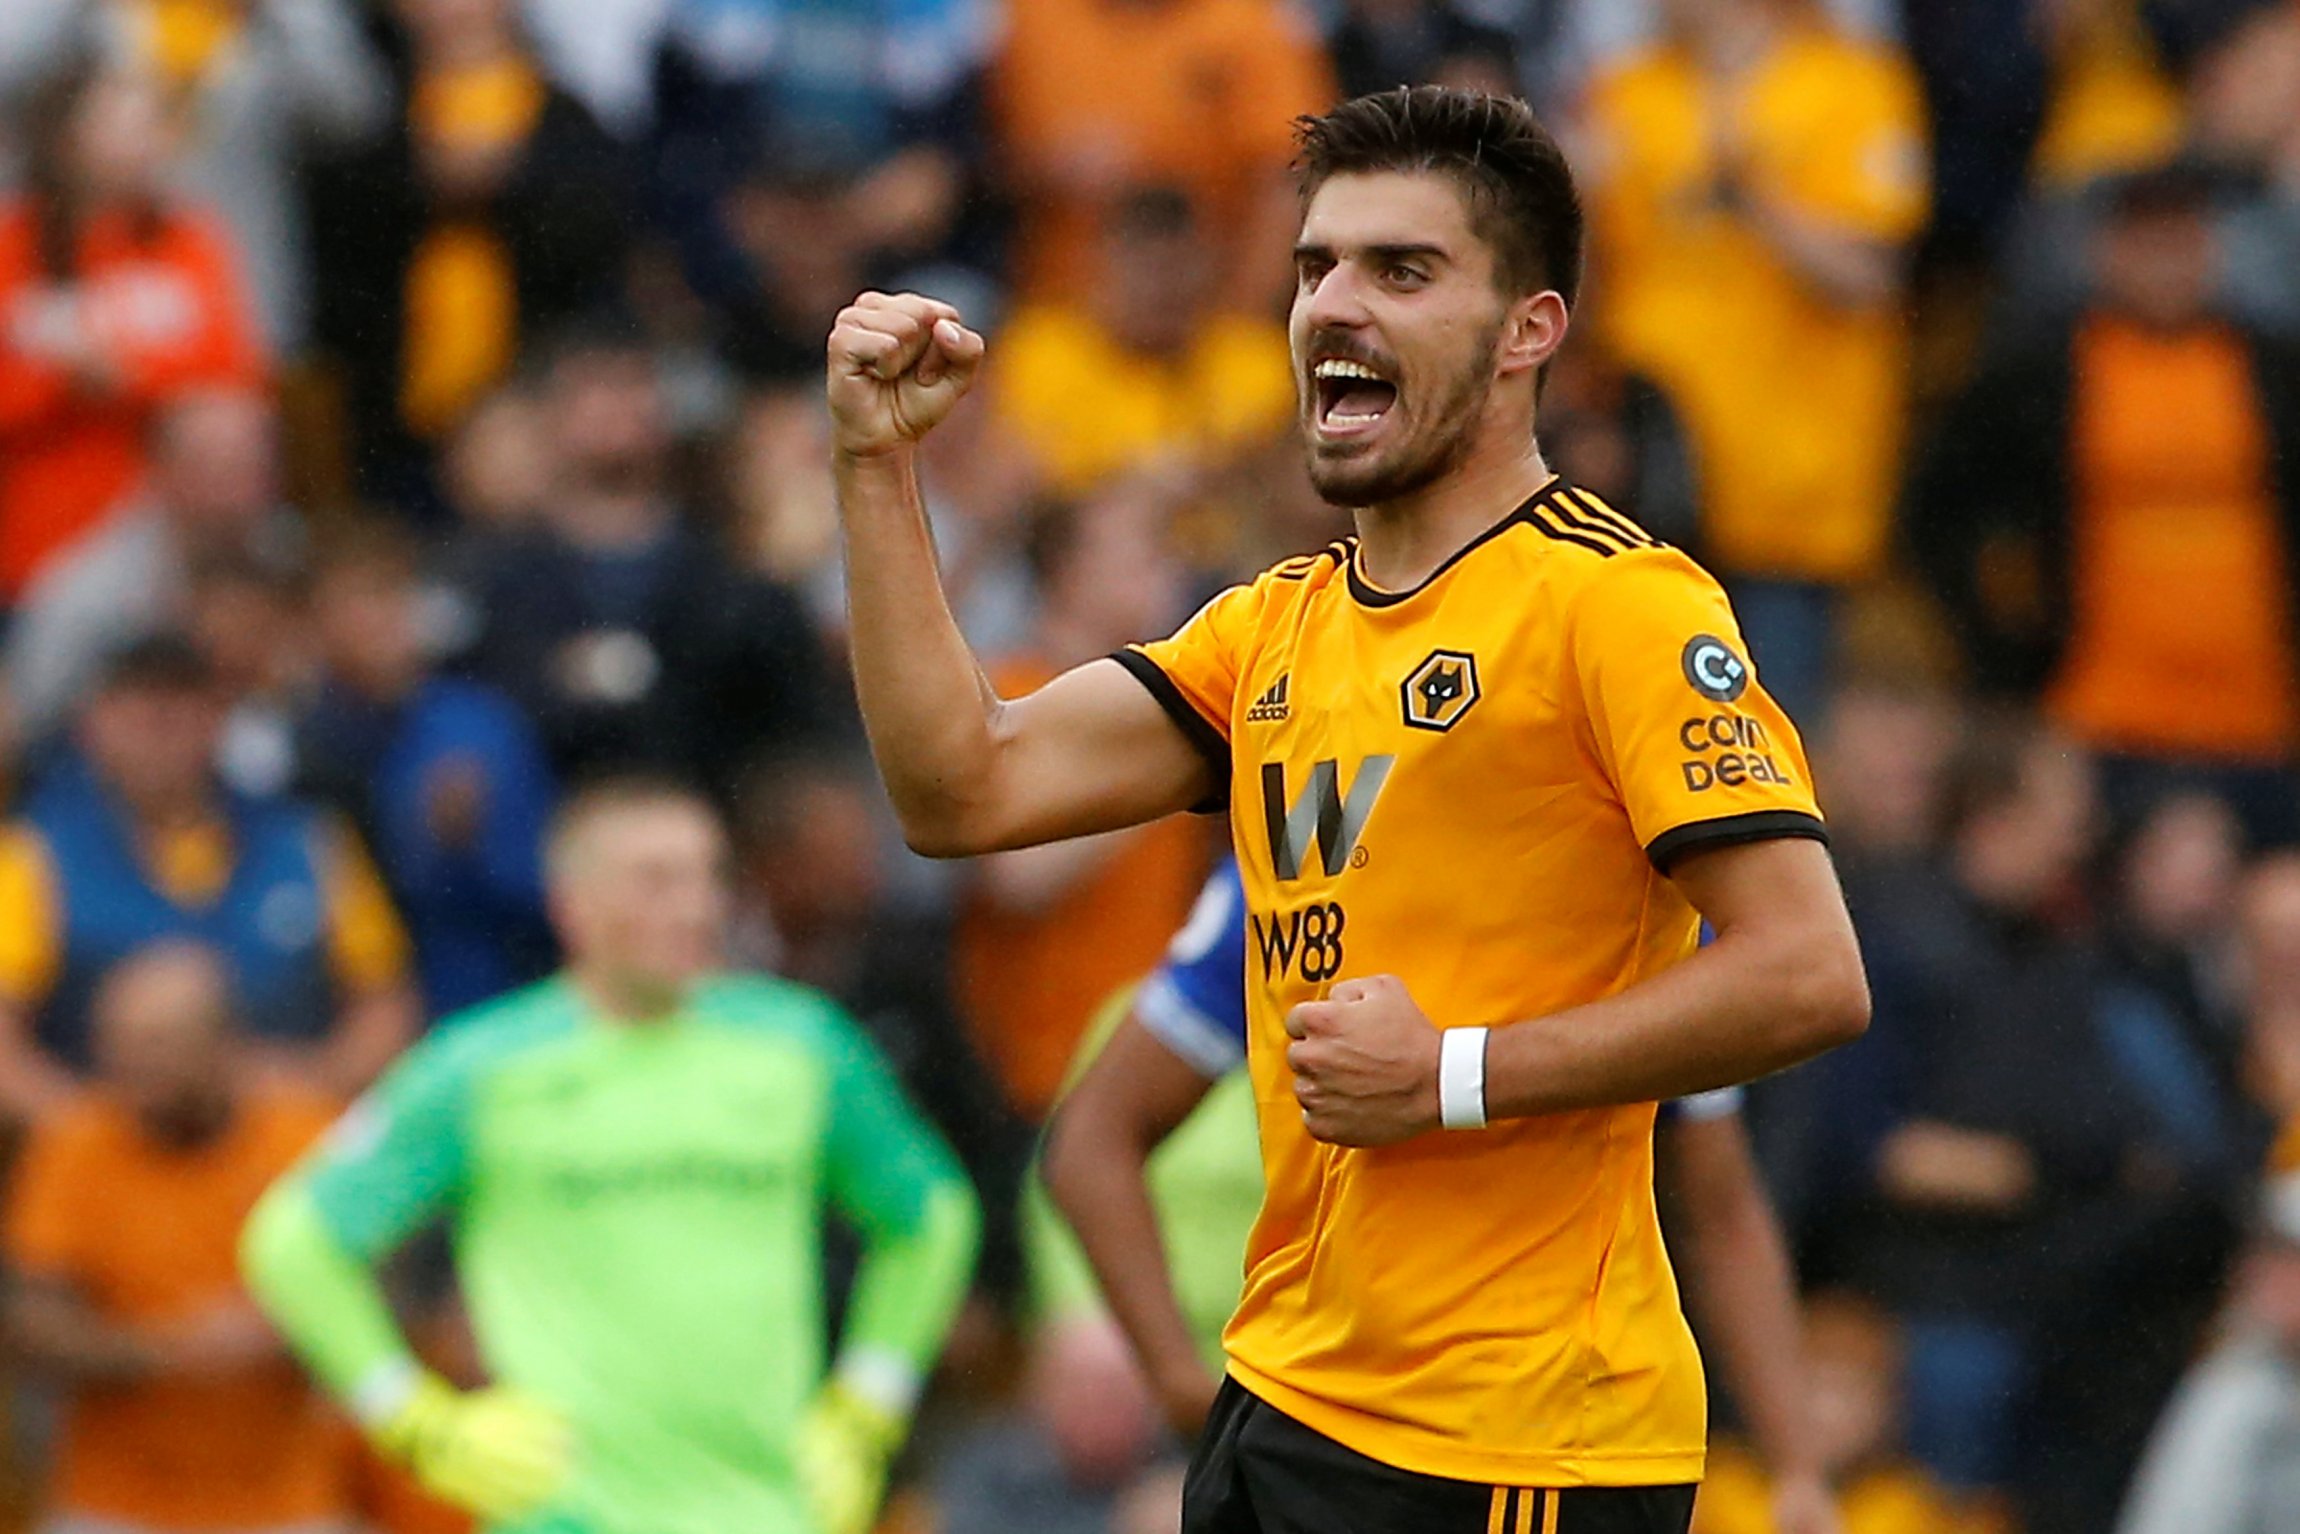 Ruben Neves celebrates after scoring for Wolves. (Getty Images)